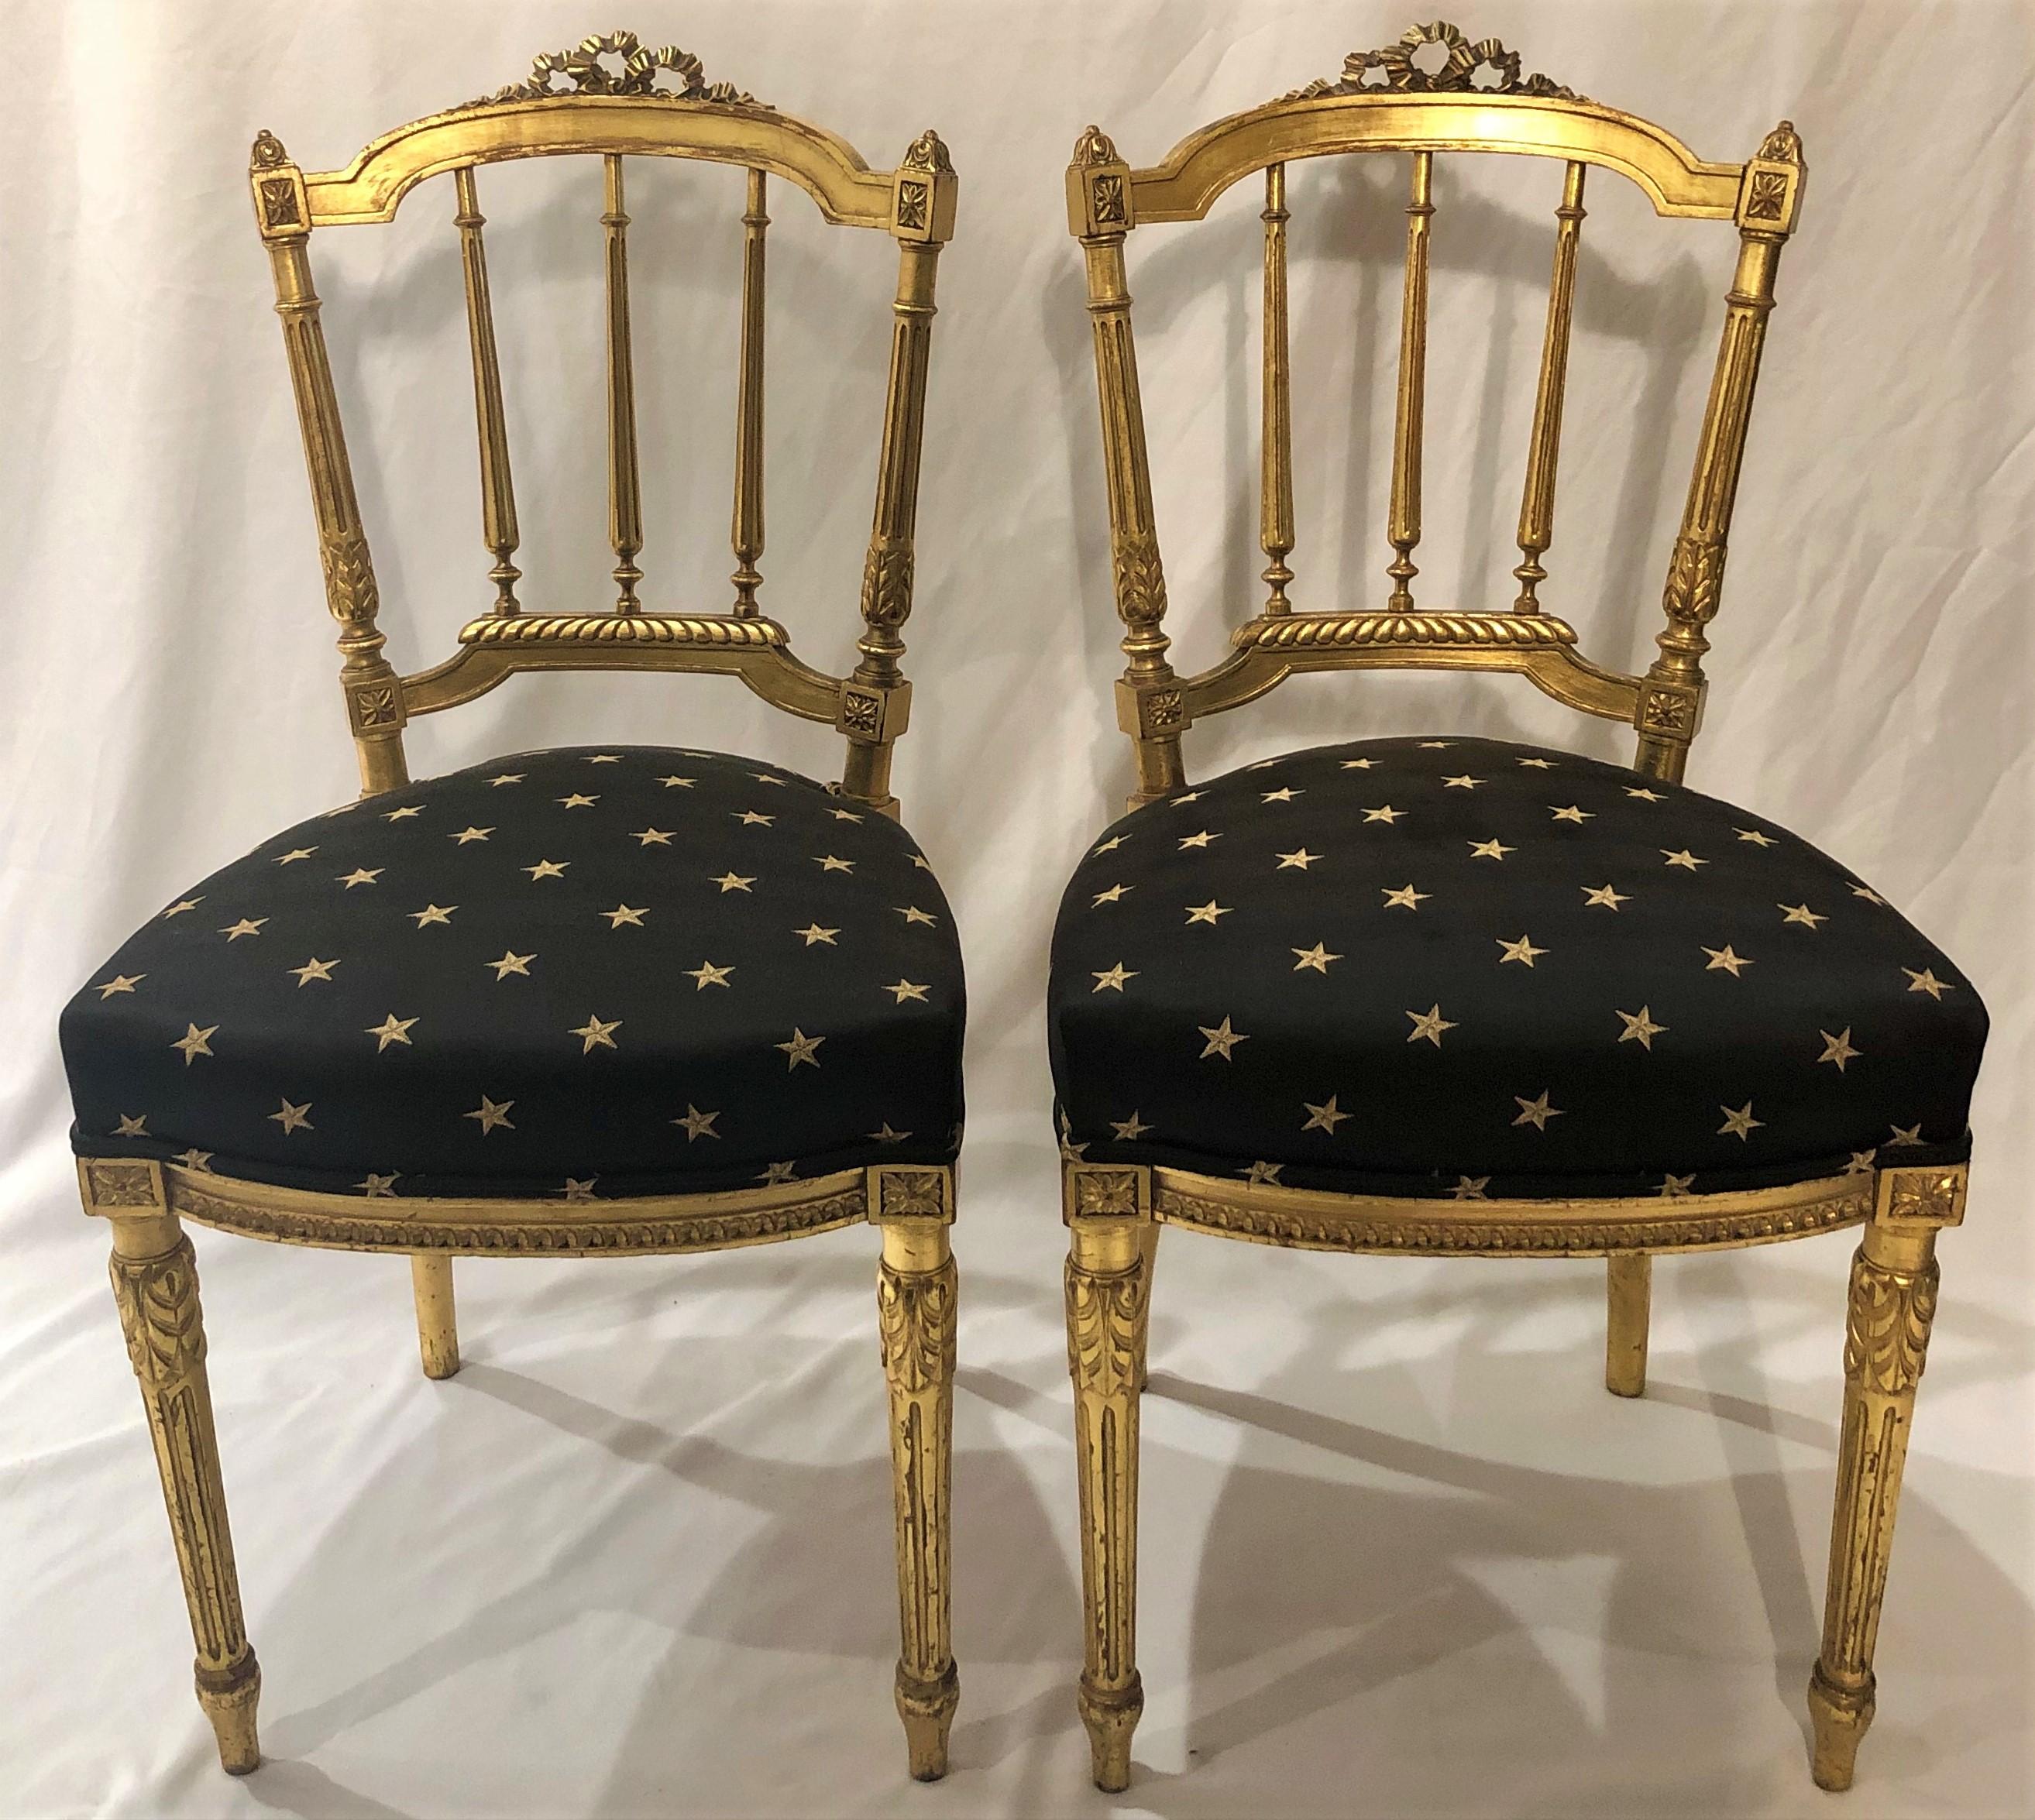 Pair of antique French Louis XVI style gold side chairs, circa 1880.